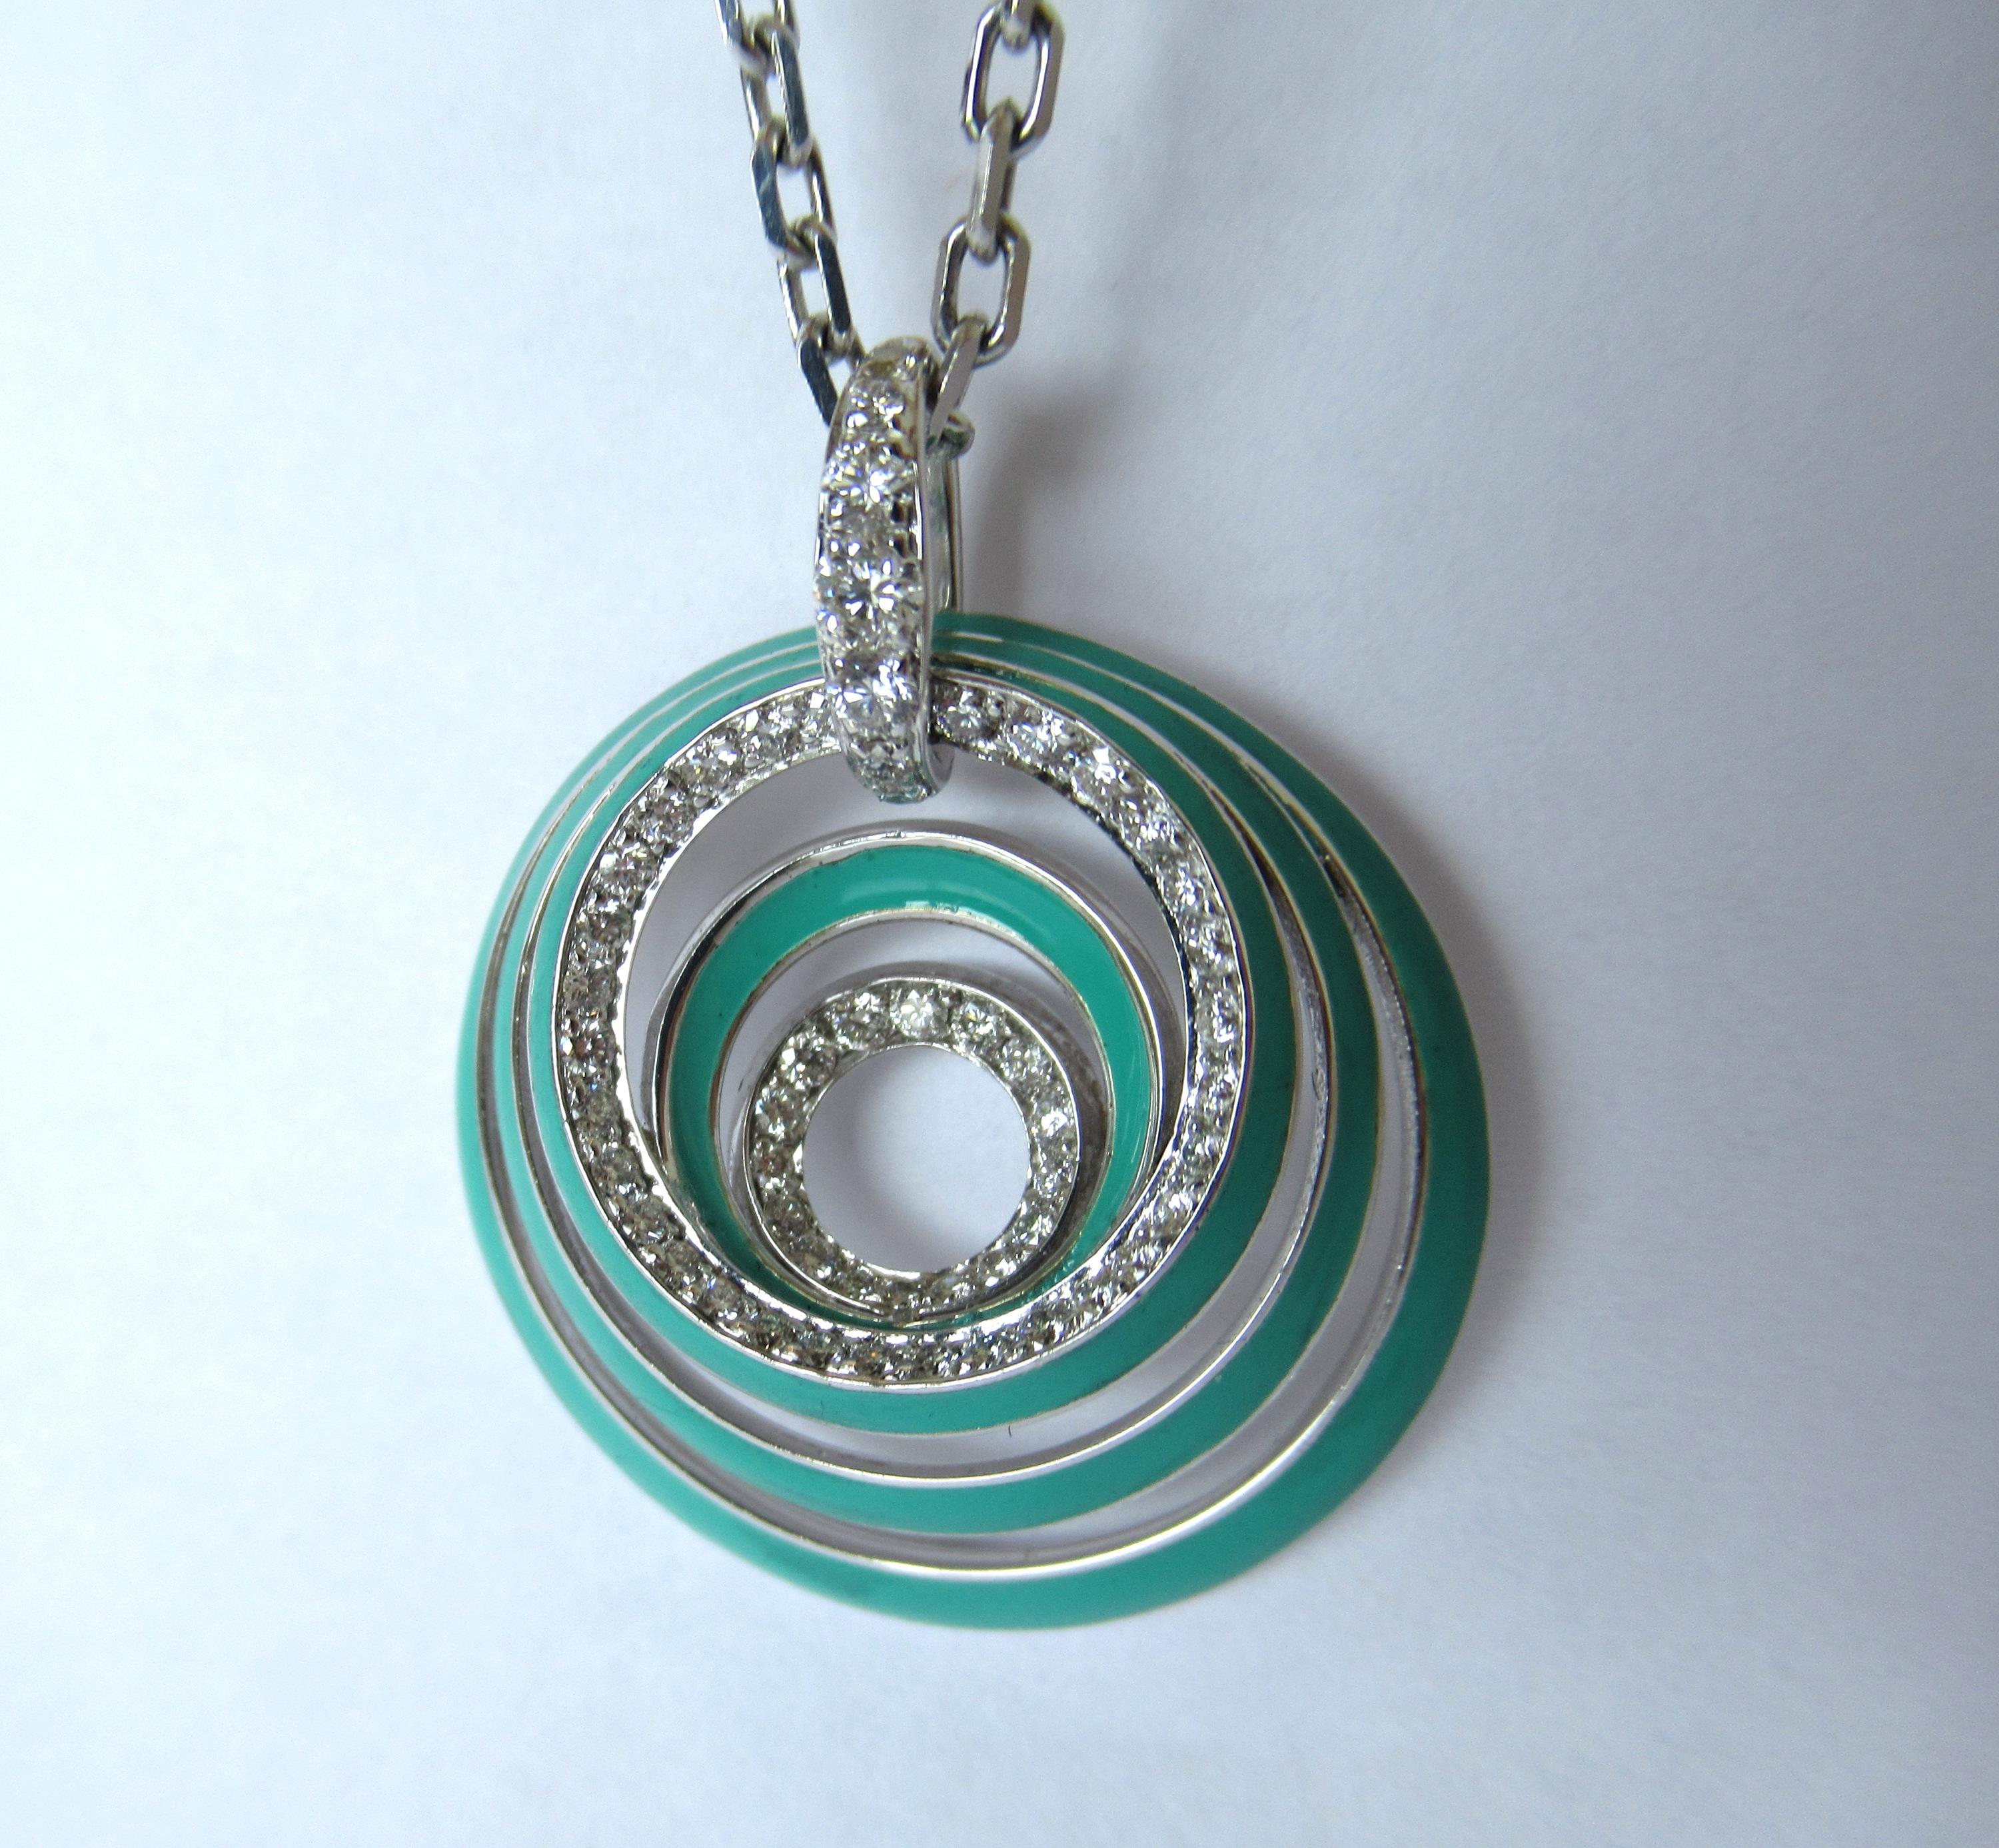 Necklace from the Aura Collection  in 18 K White Gold with Turquoise Enamel and white diamonds.This collection evokes the notion of energy transmitted from within, representing the aura in each and every one of us. The circles of each jewel, seven